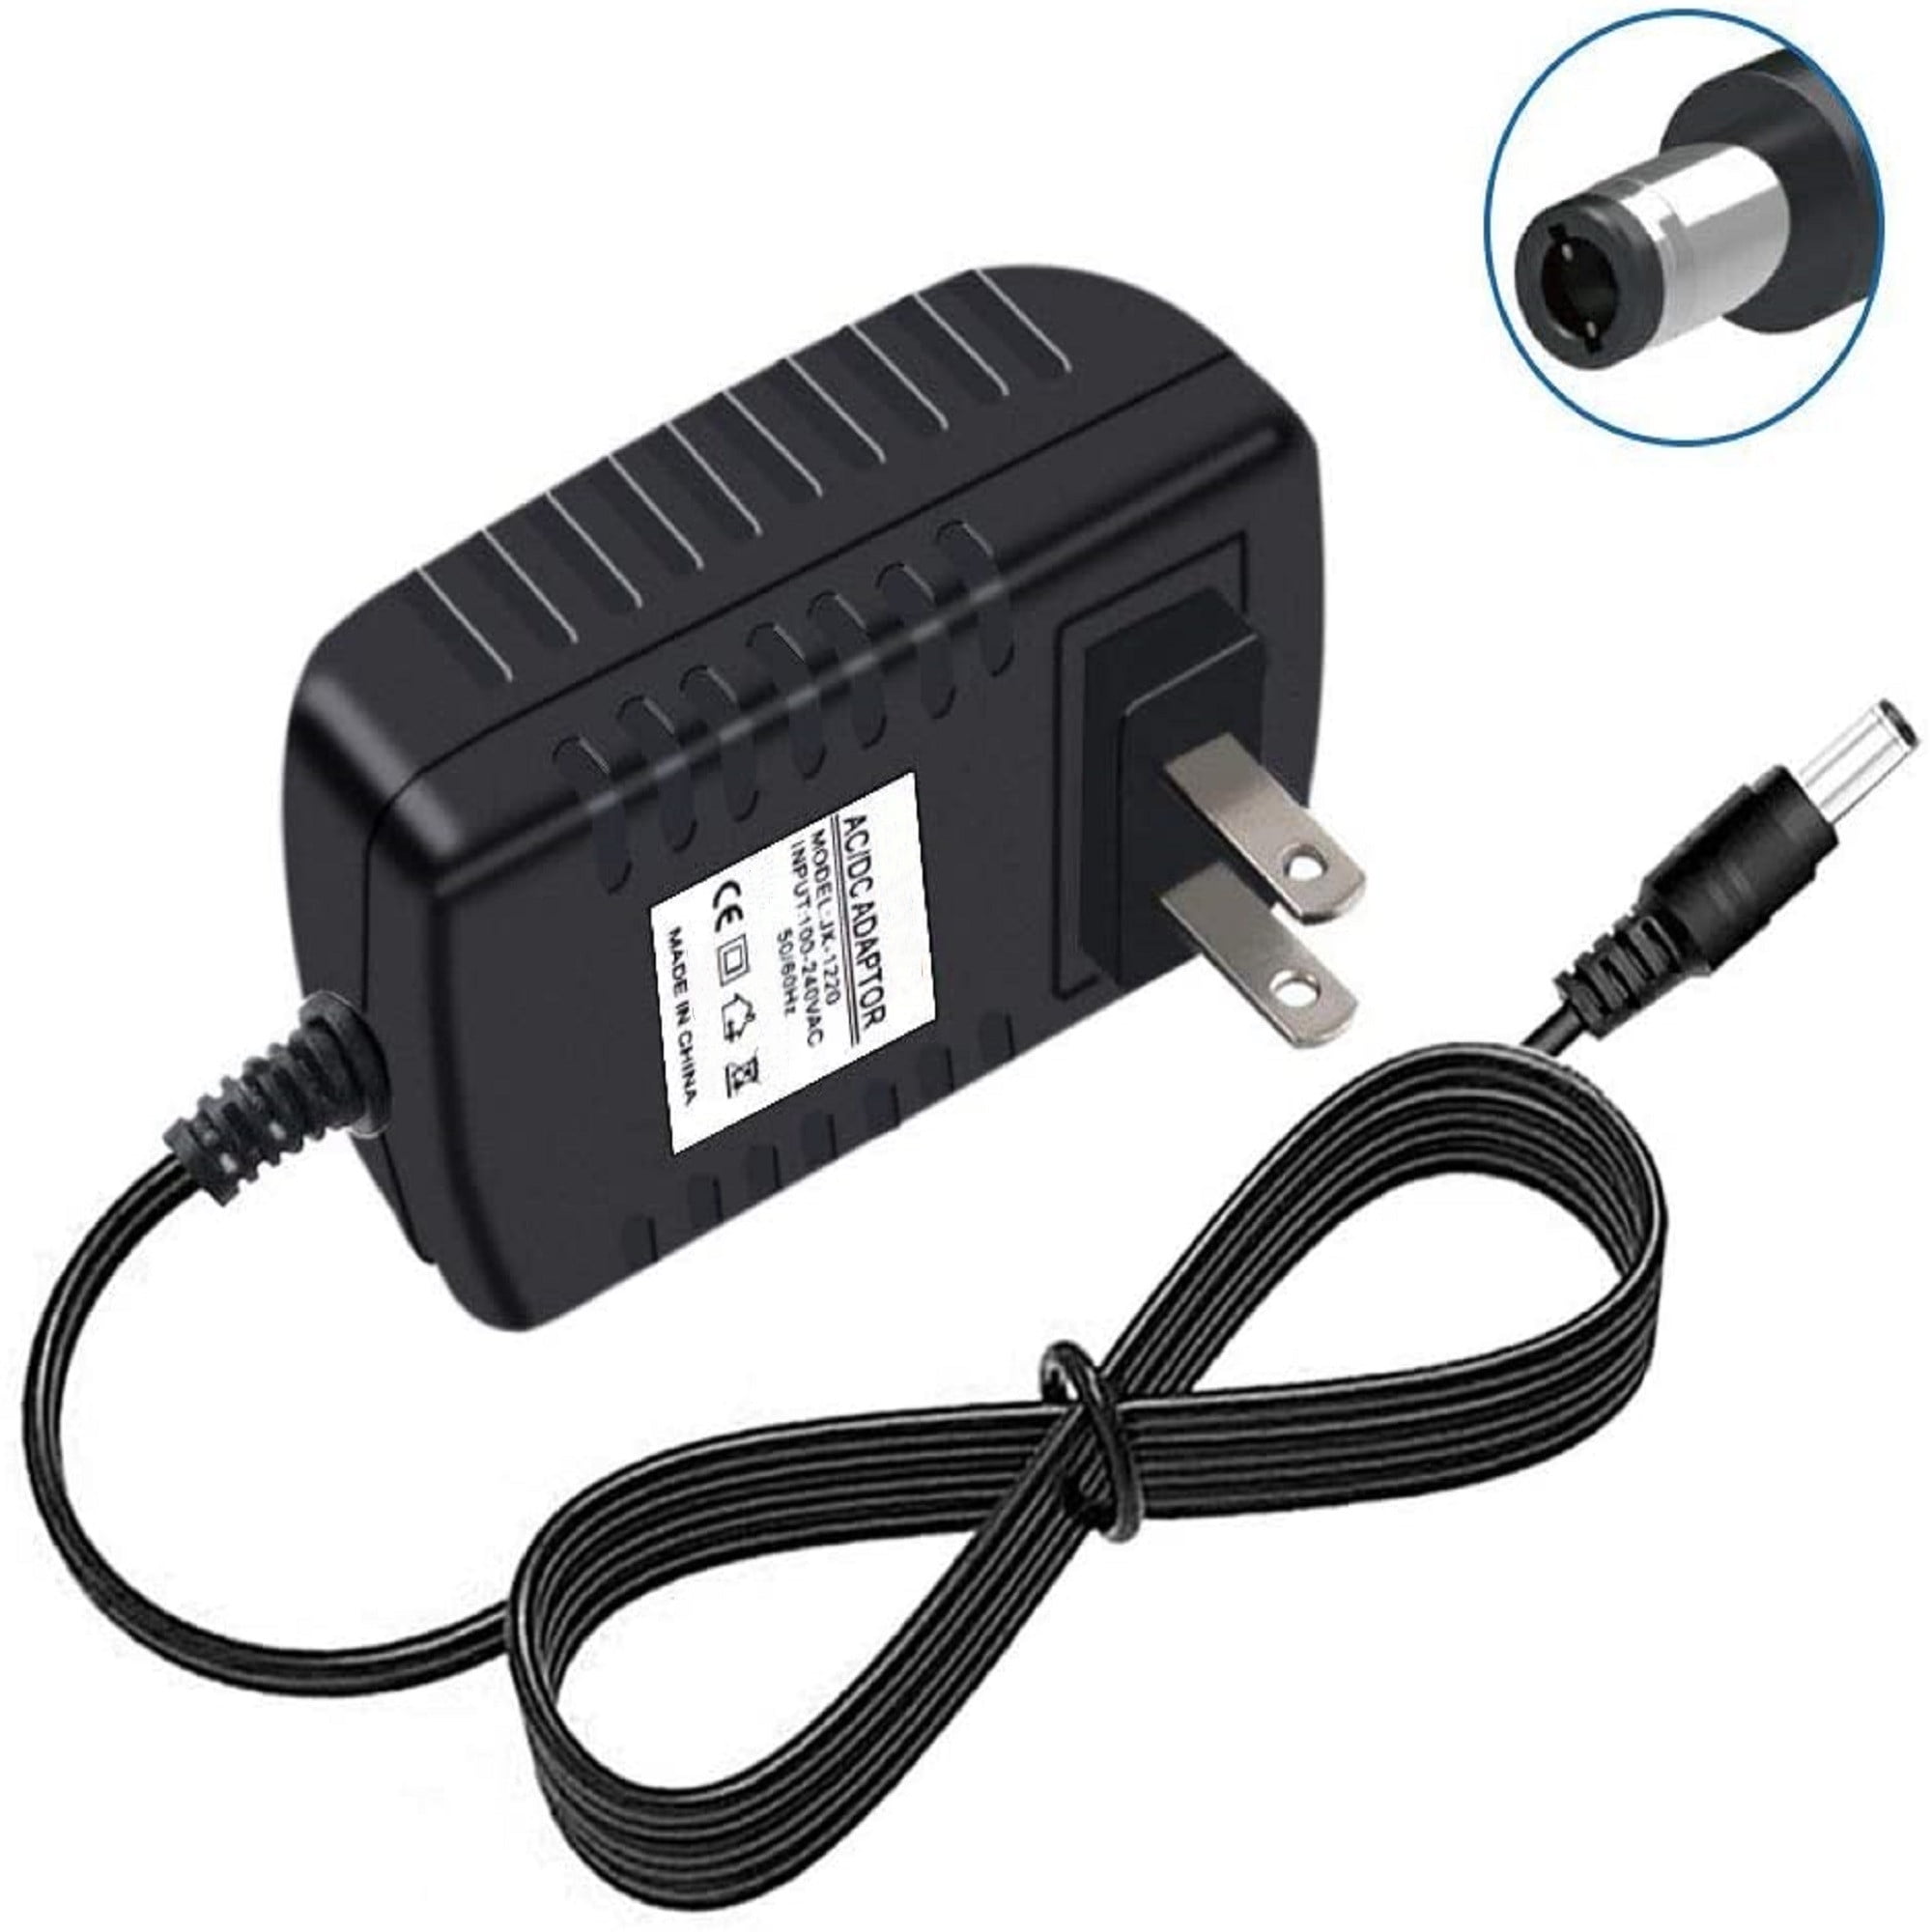 AC Adapter Wall Charger For Shark AD-1520-UL Battery DC Power Supply Cord Cable 